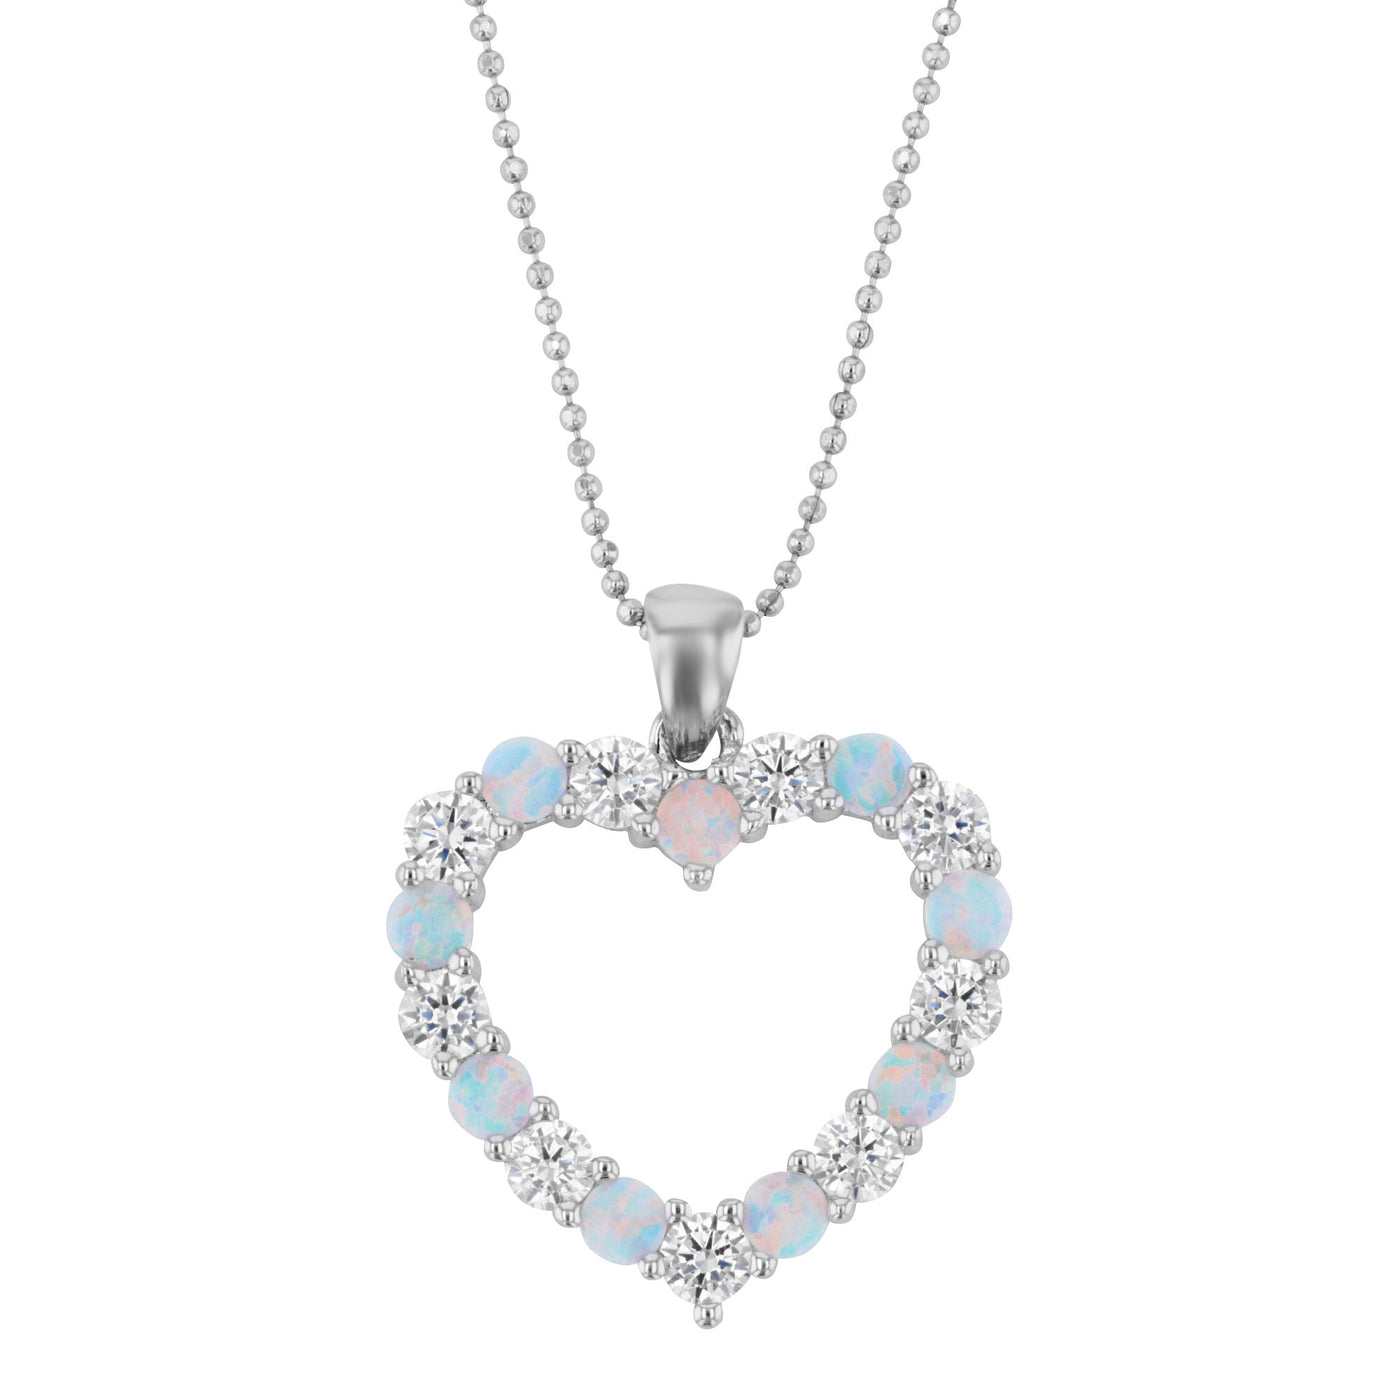 Rebecca Sloane Silver Heart Pendant with Synthetic Opal & CZ